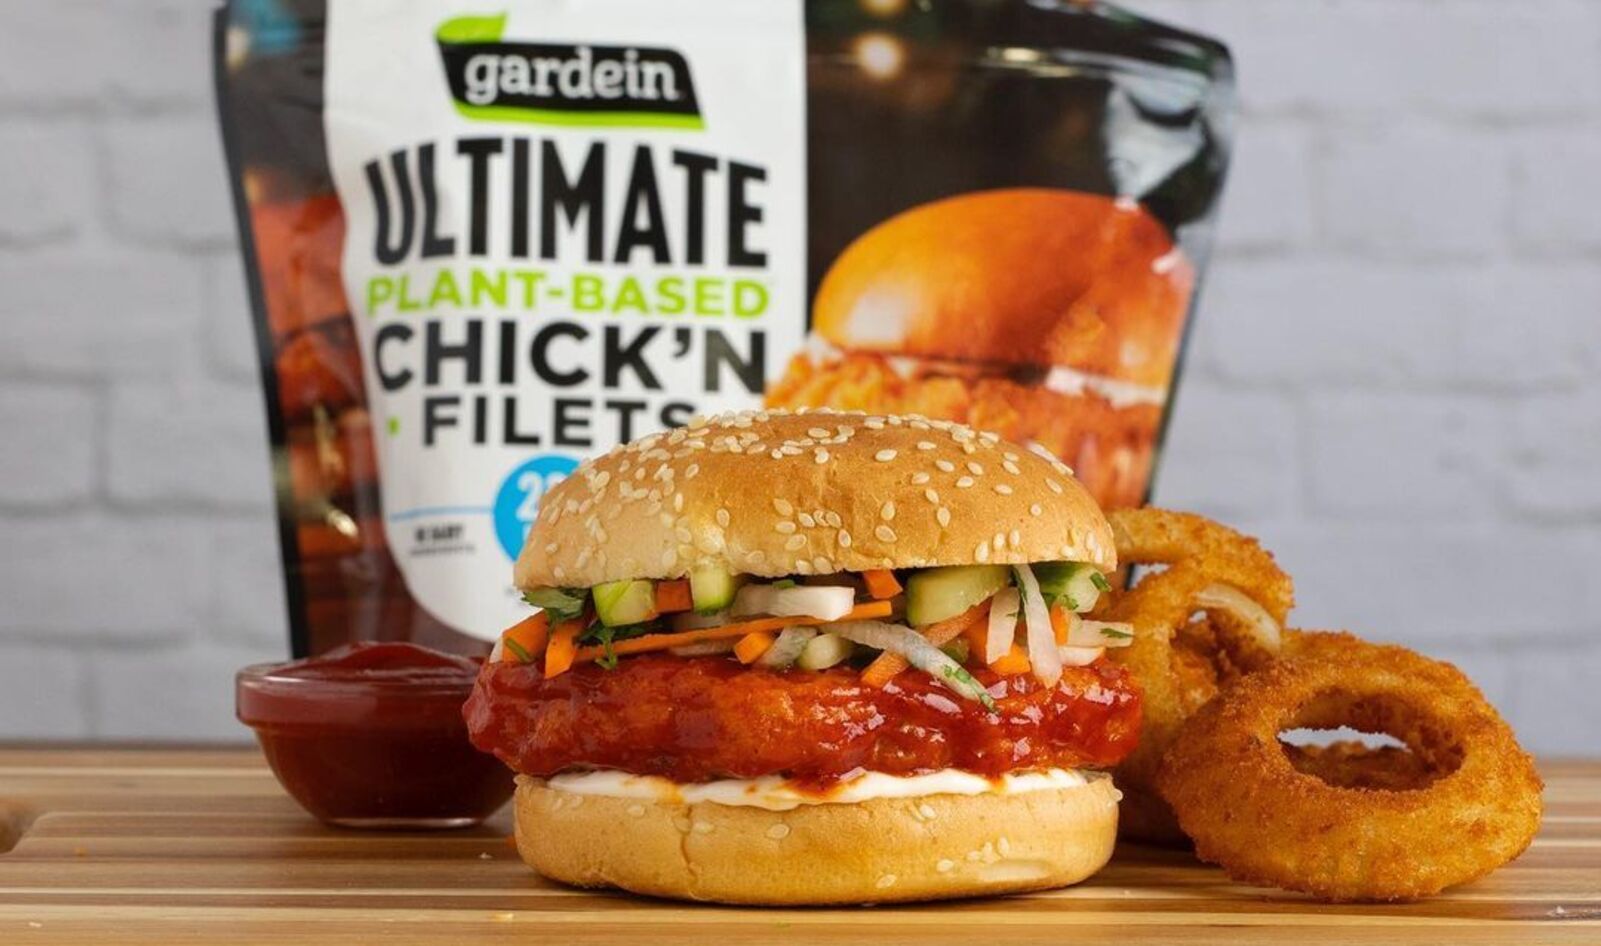 The Best Vegan Gardein Products From Wings to Crab Cakes